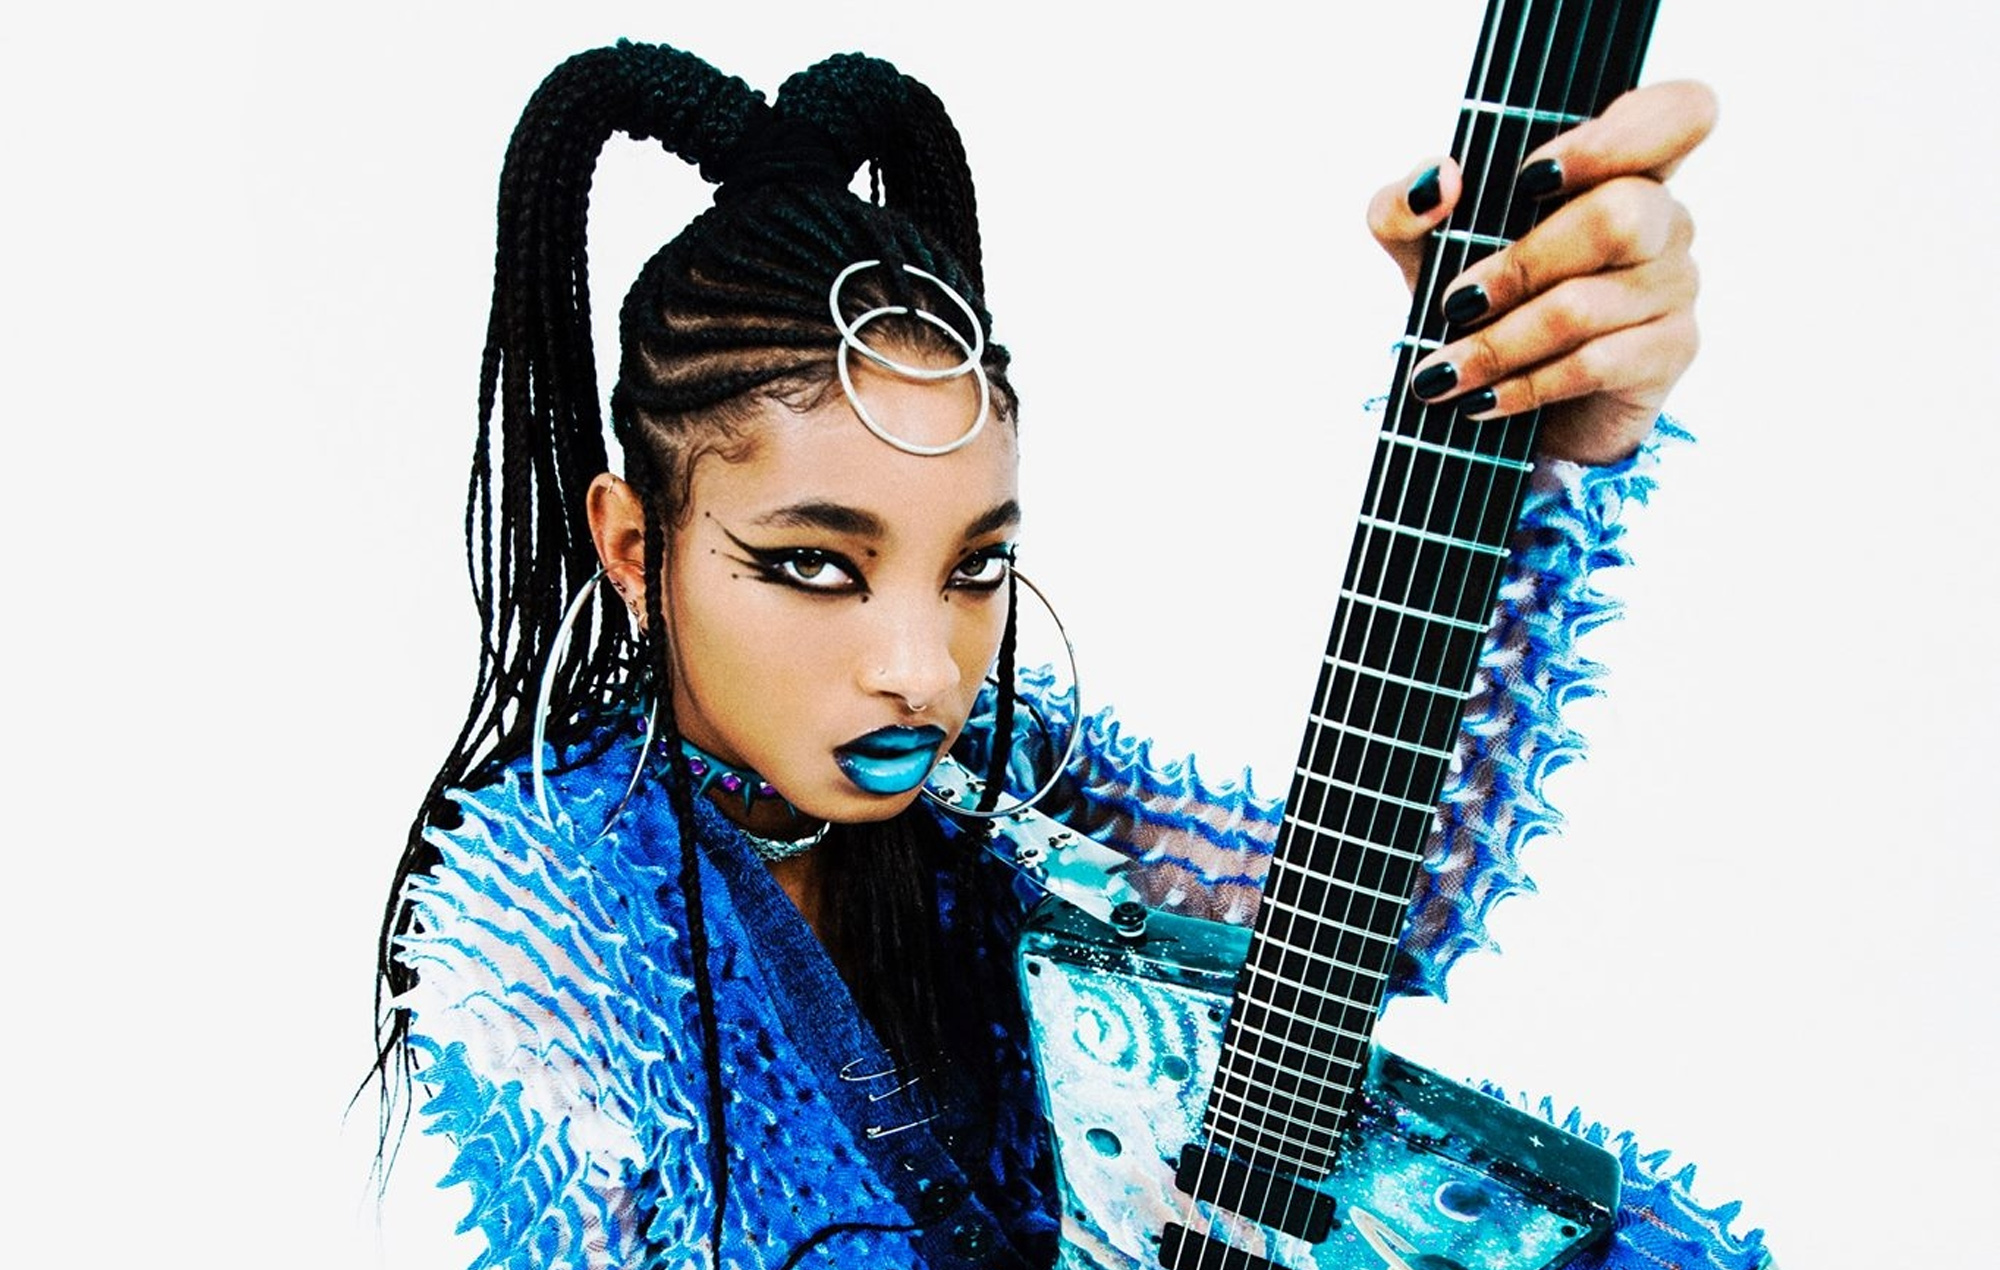 Willow Smith Gives Shocking "Whip My Hair" Performance